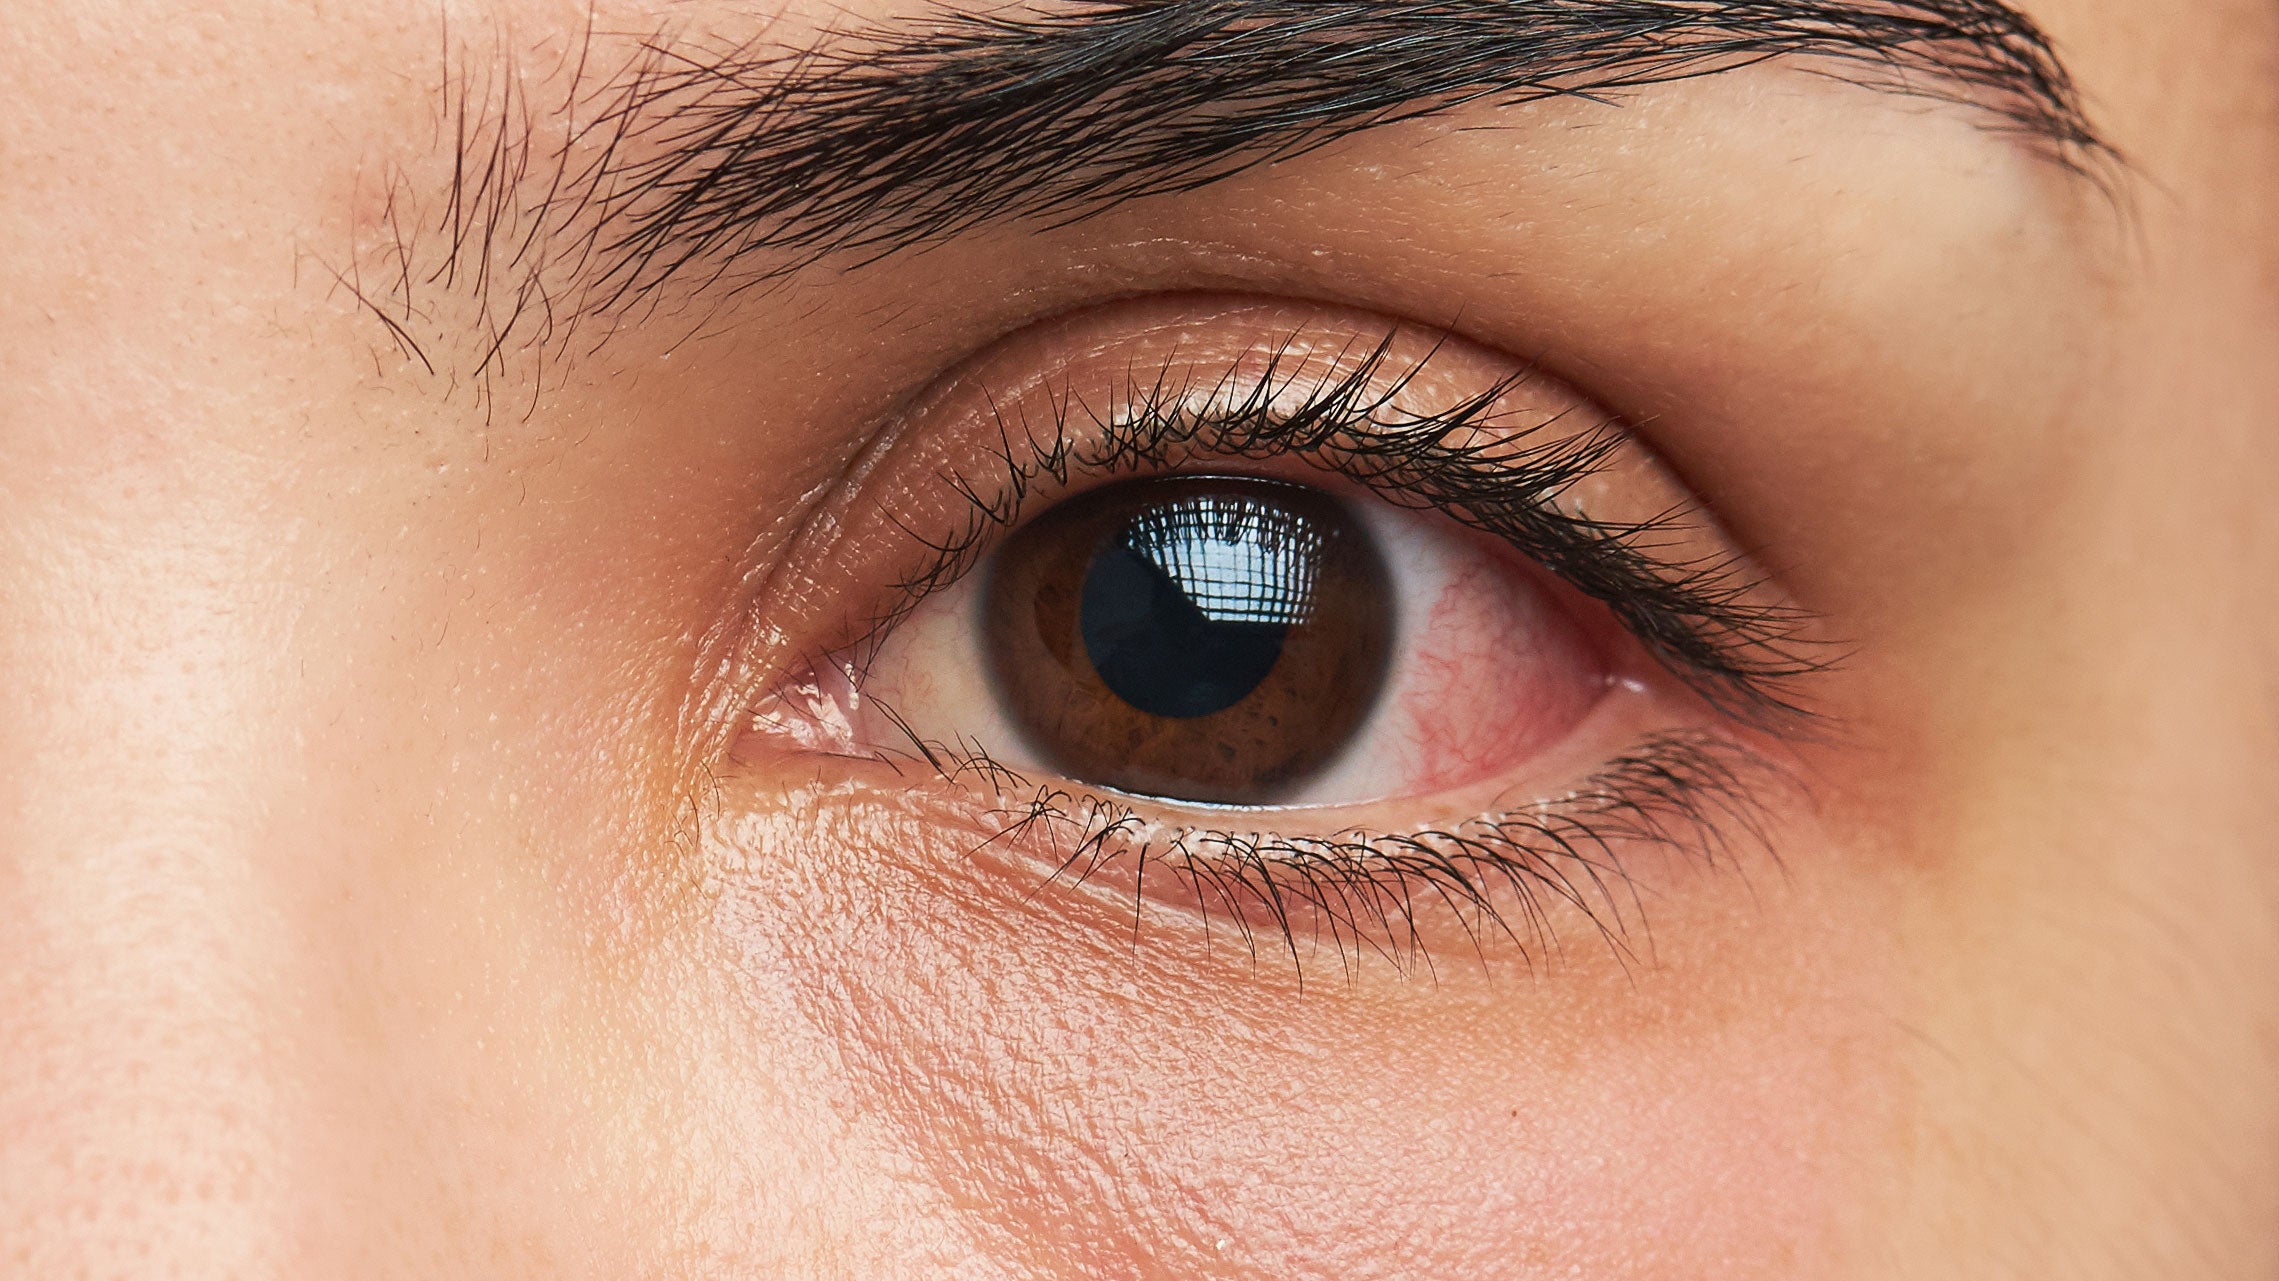 Under-Eye Swelling (Puffy Eyes): Causes, treatment, and more